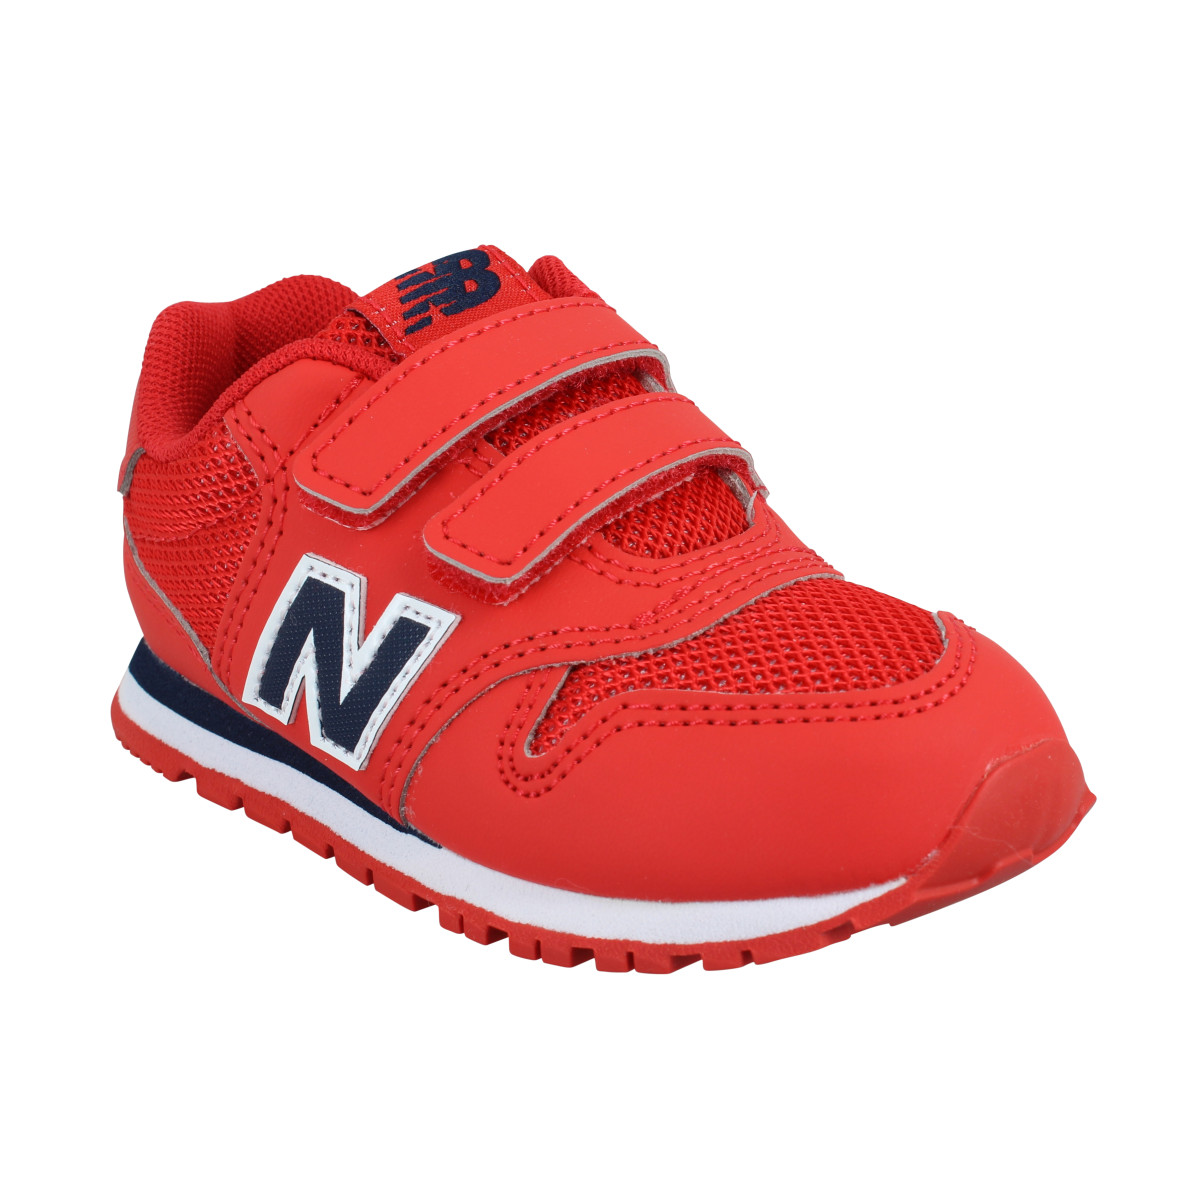 Baskets NEW BALANCE 500 toile Enfant Red Navy